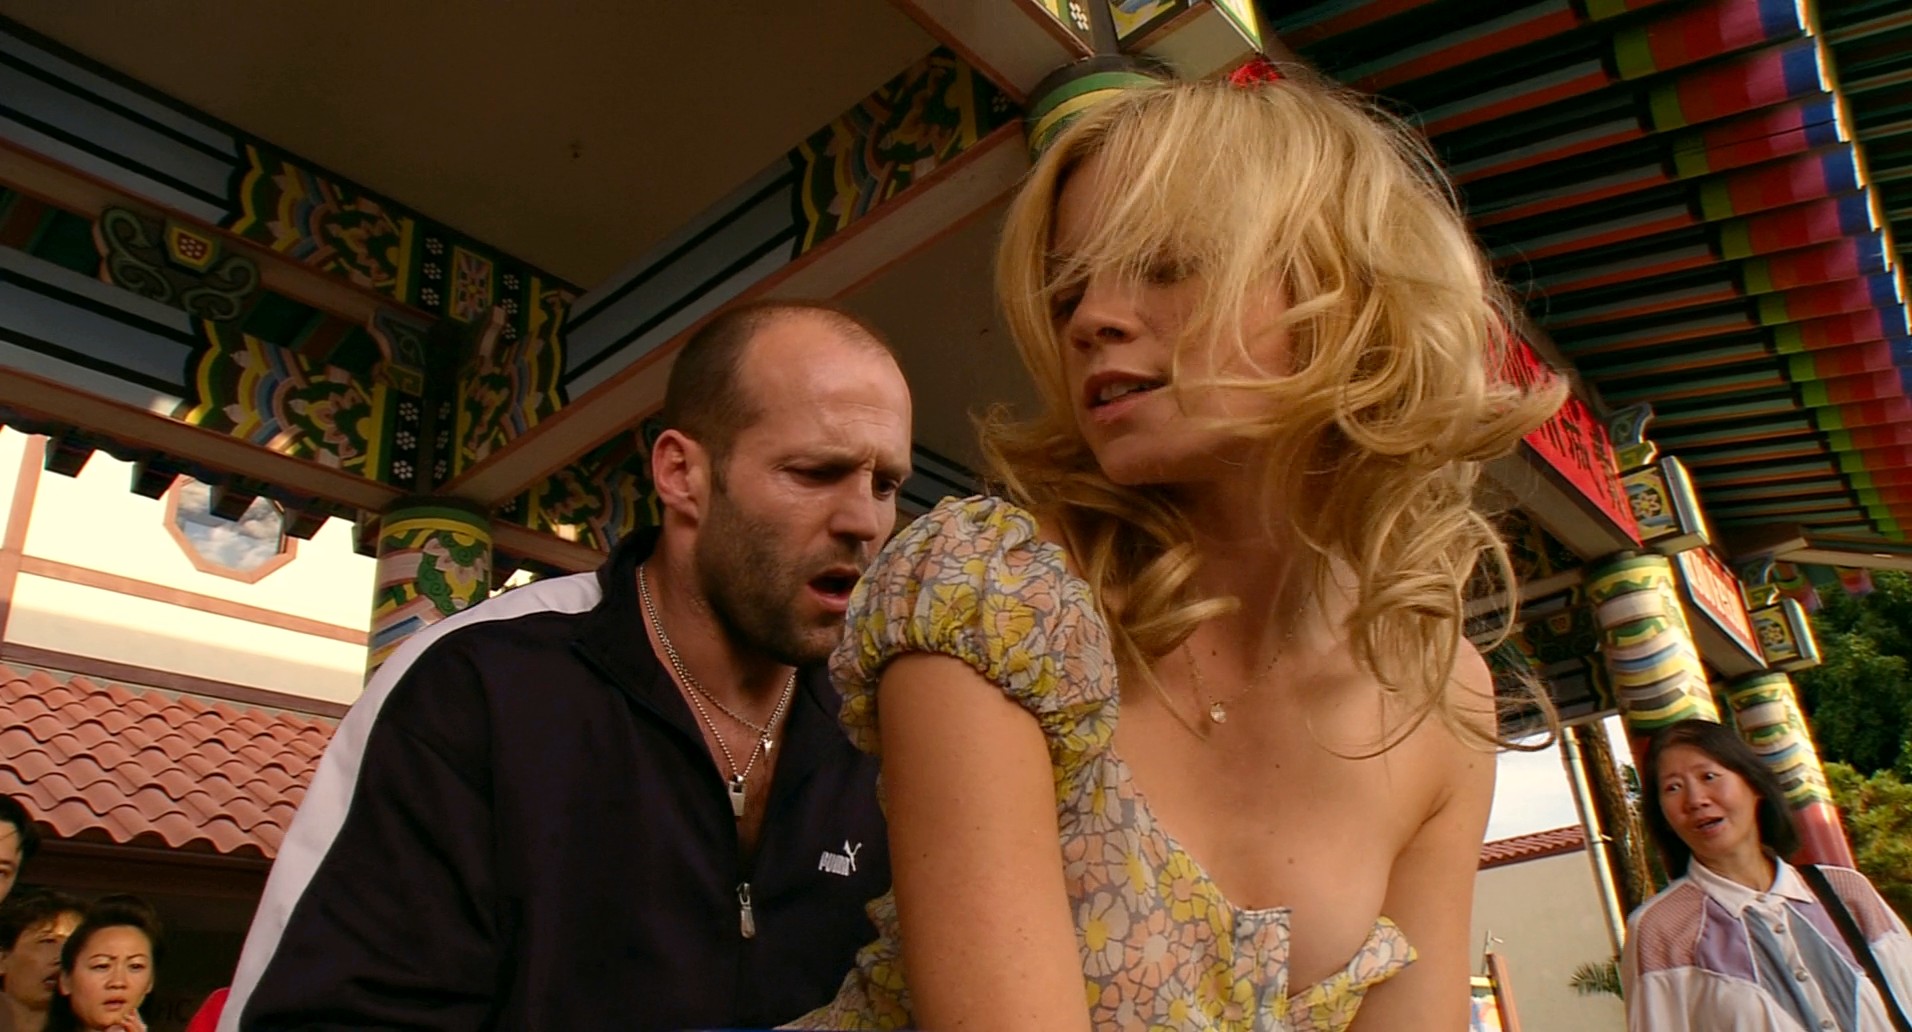 Jason statham in Crank (2006) - his character injected with a deadly poison